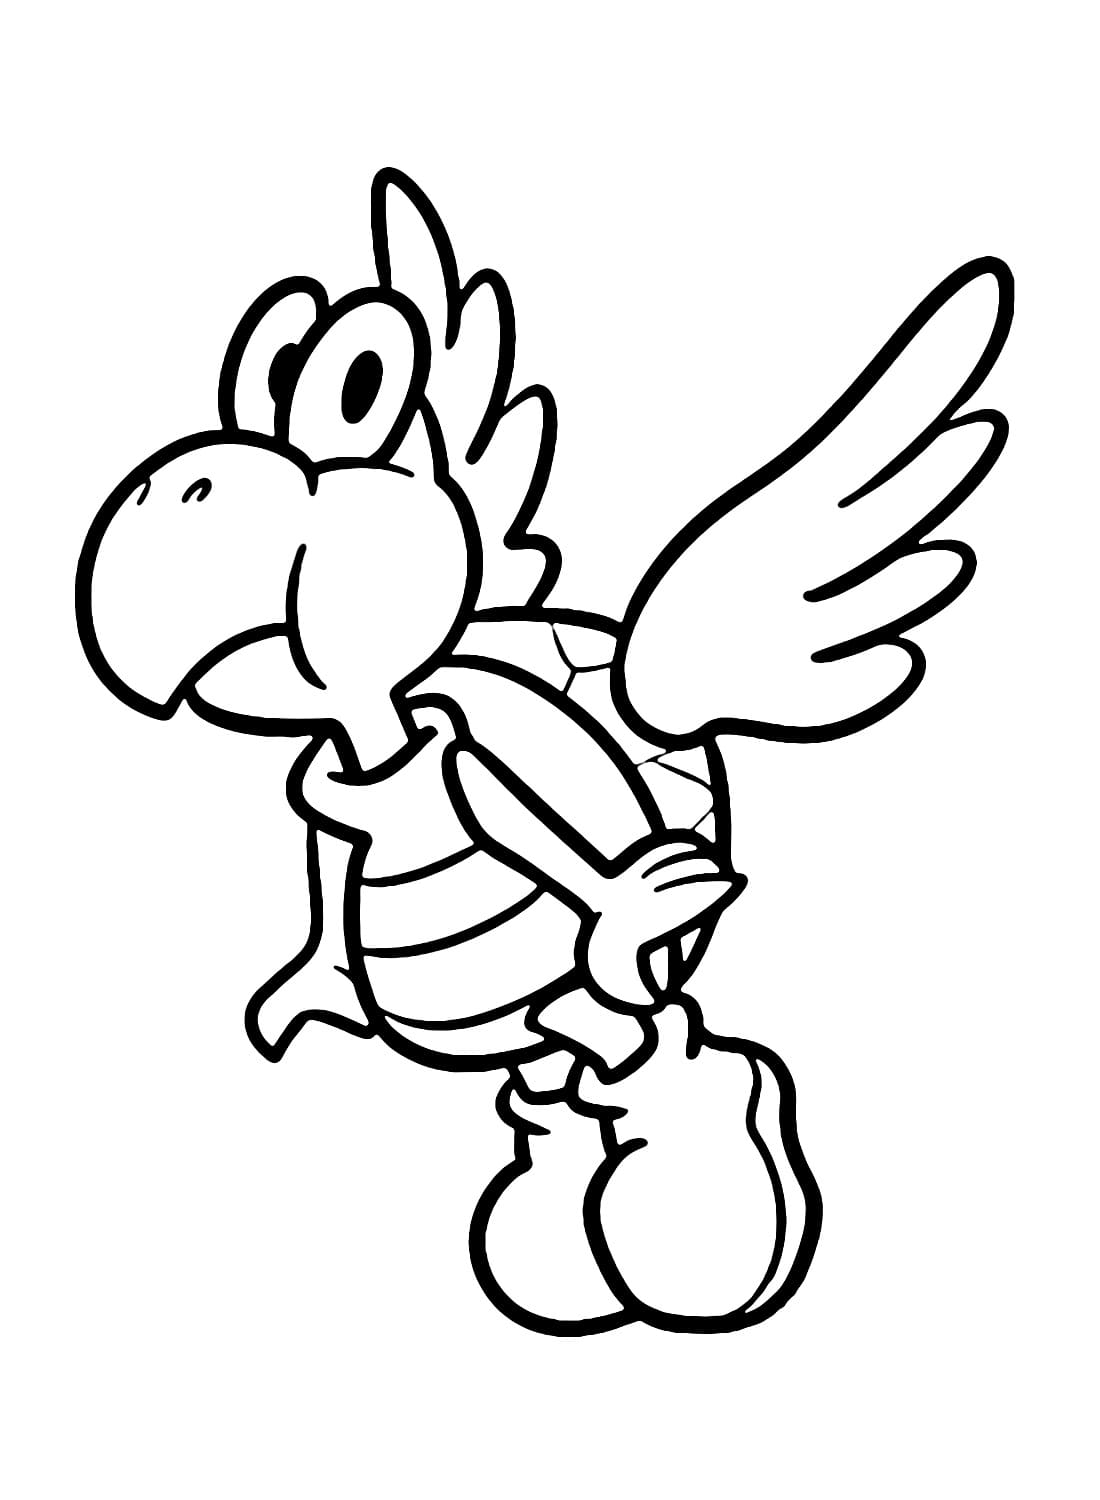 Koopa Troopa avec Ailes coloring page